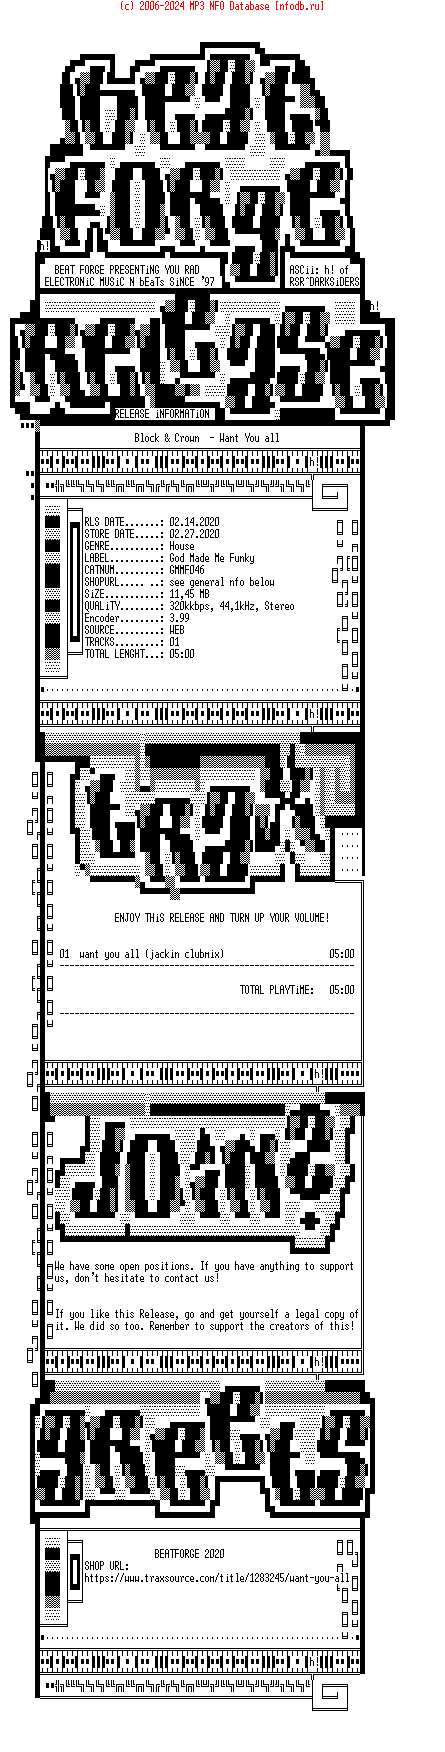 Block_And_Crown-Want_You_All-(GMMF046)-Single-WEB-2020